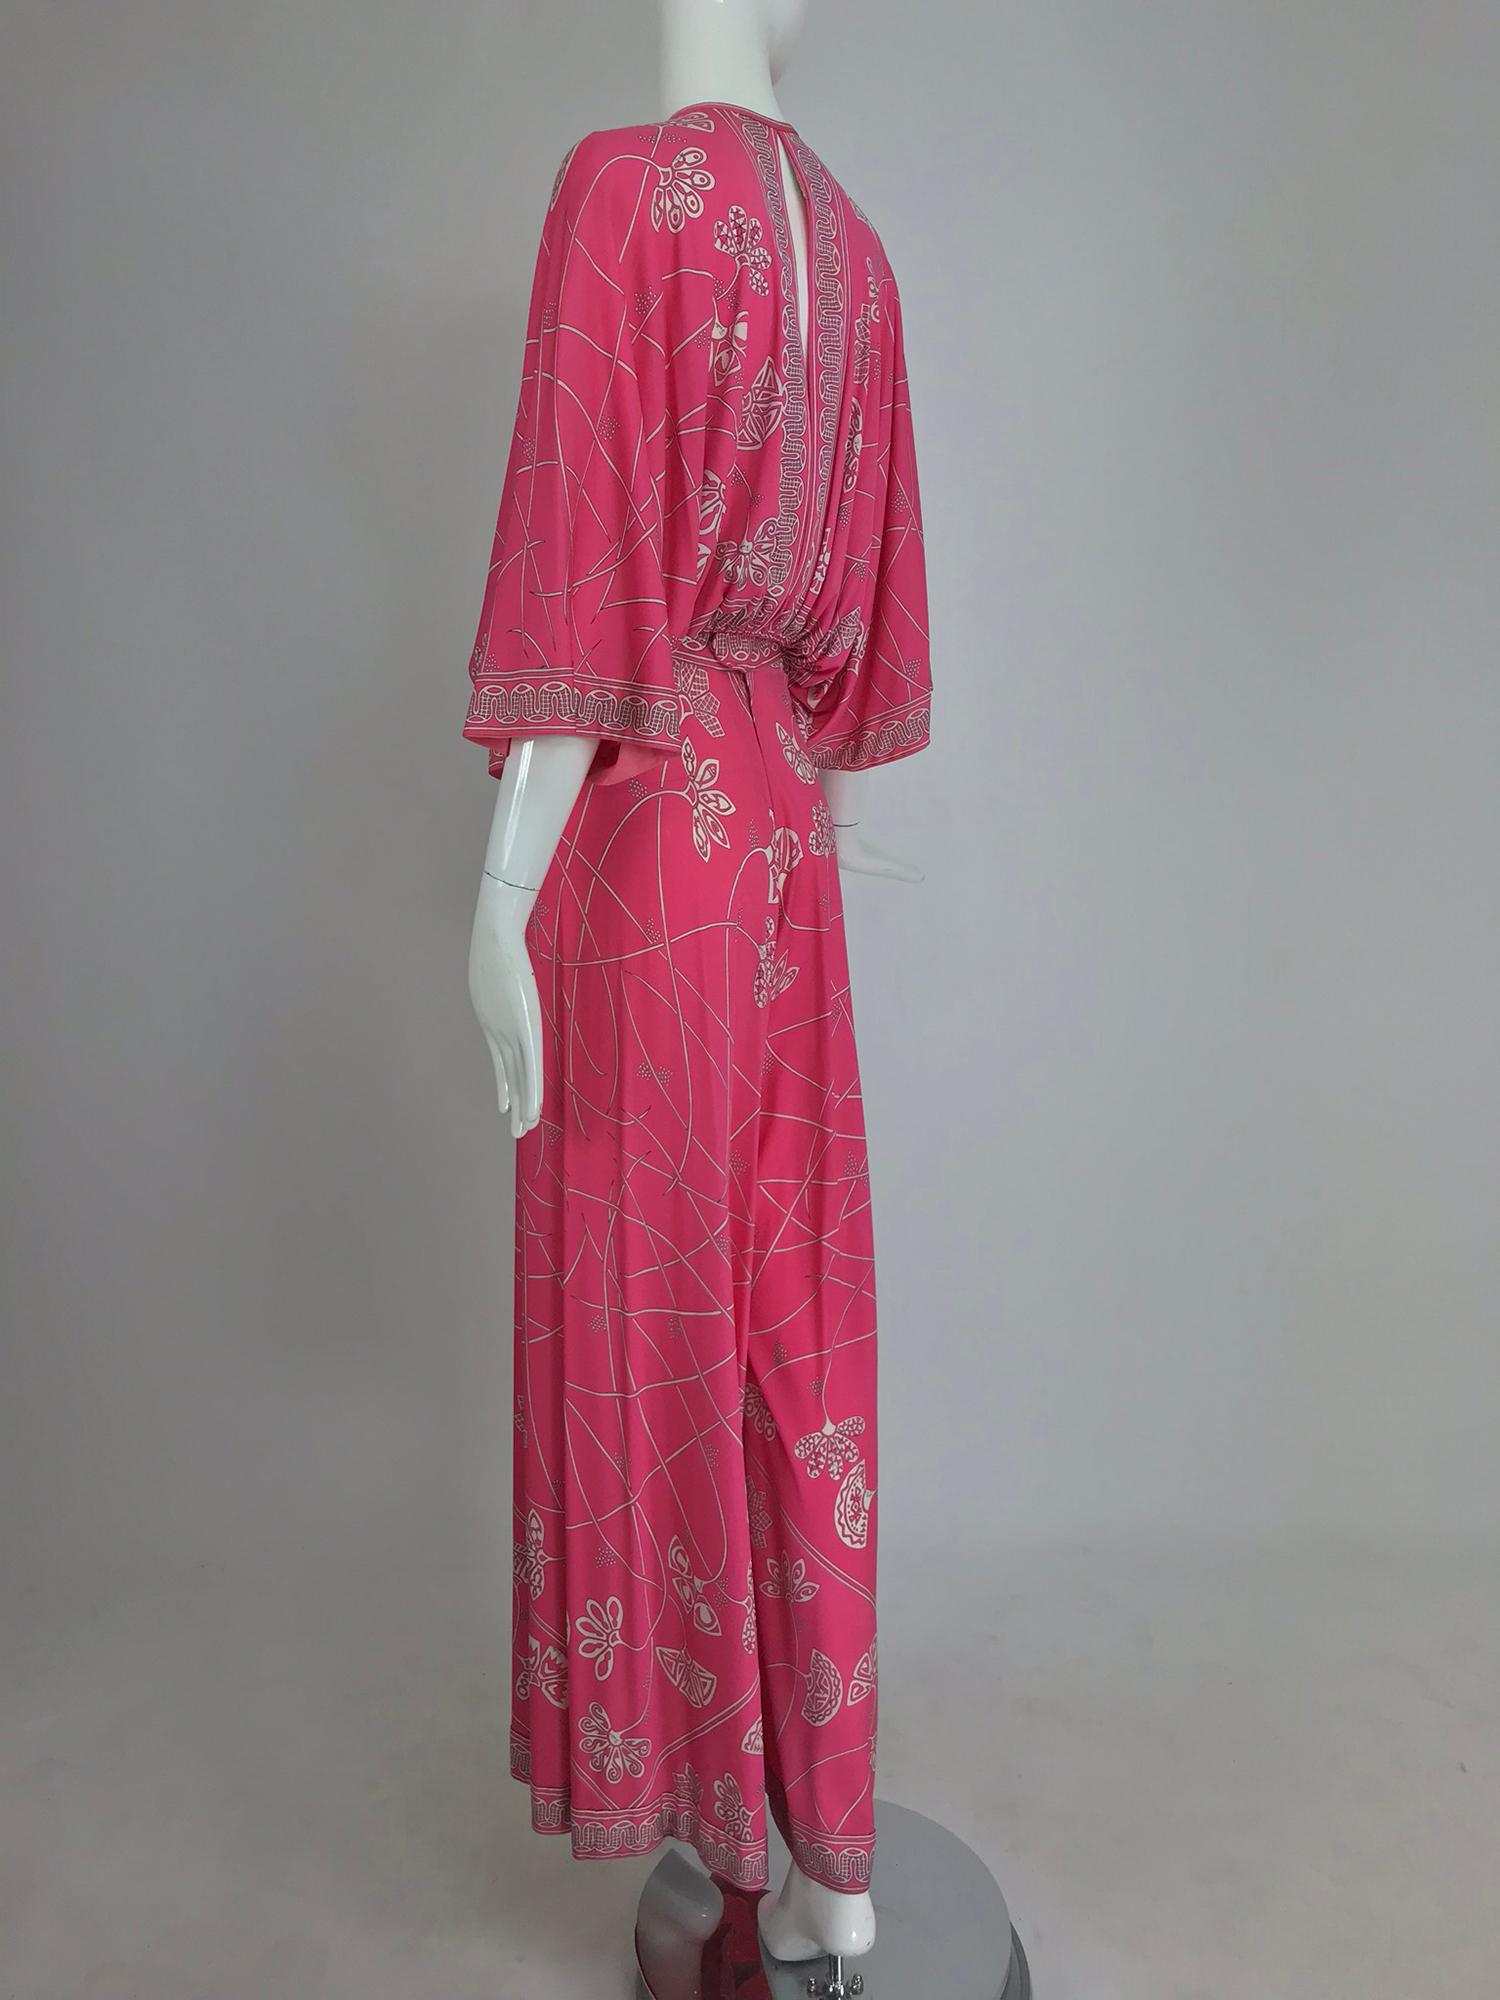 Pink Emilio Pucci silk jersey plunge top and palazzo trousers, 1970s